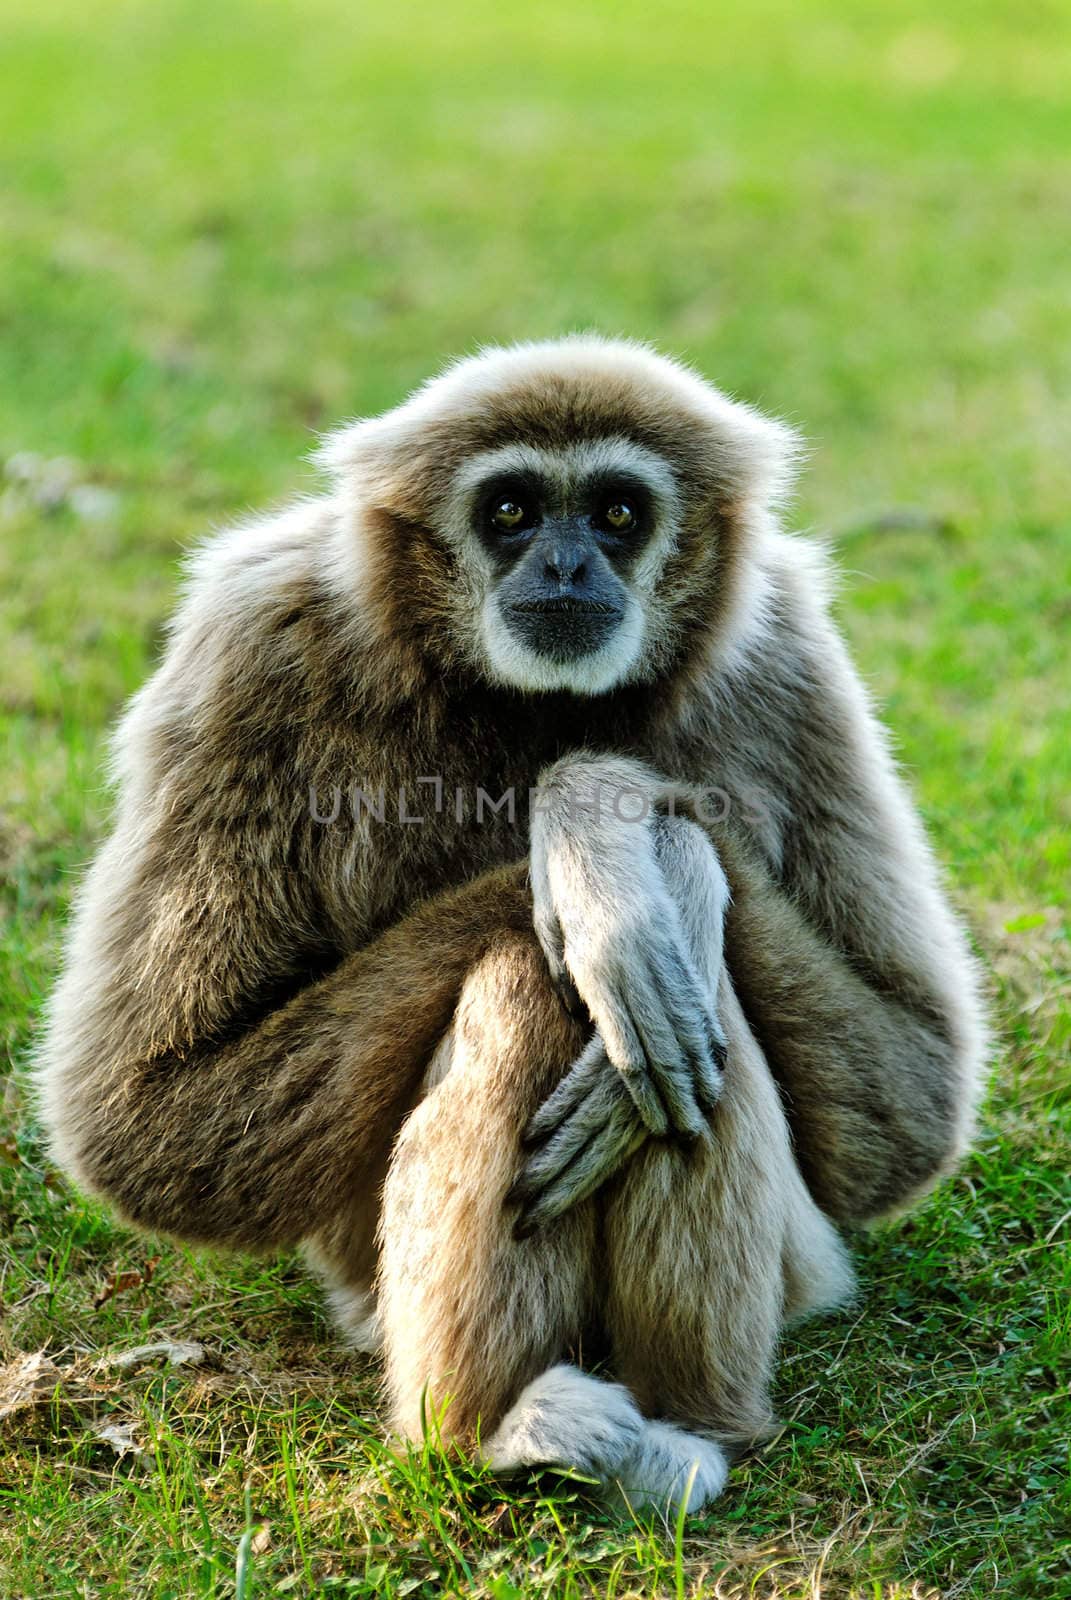 Whitehandgibbon (Hylobates lar) sitting and looking right in lens